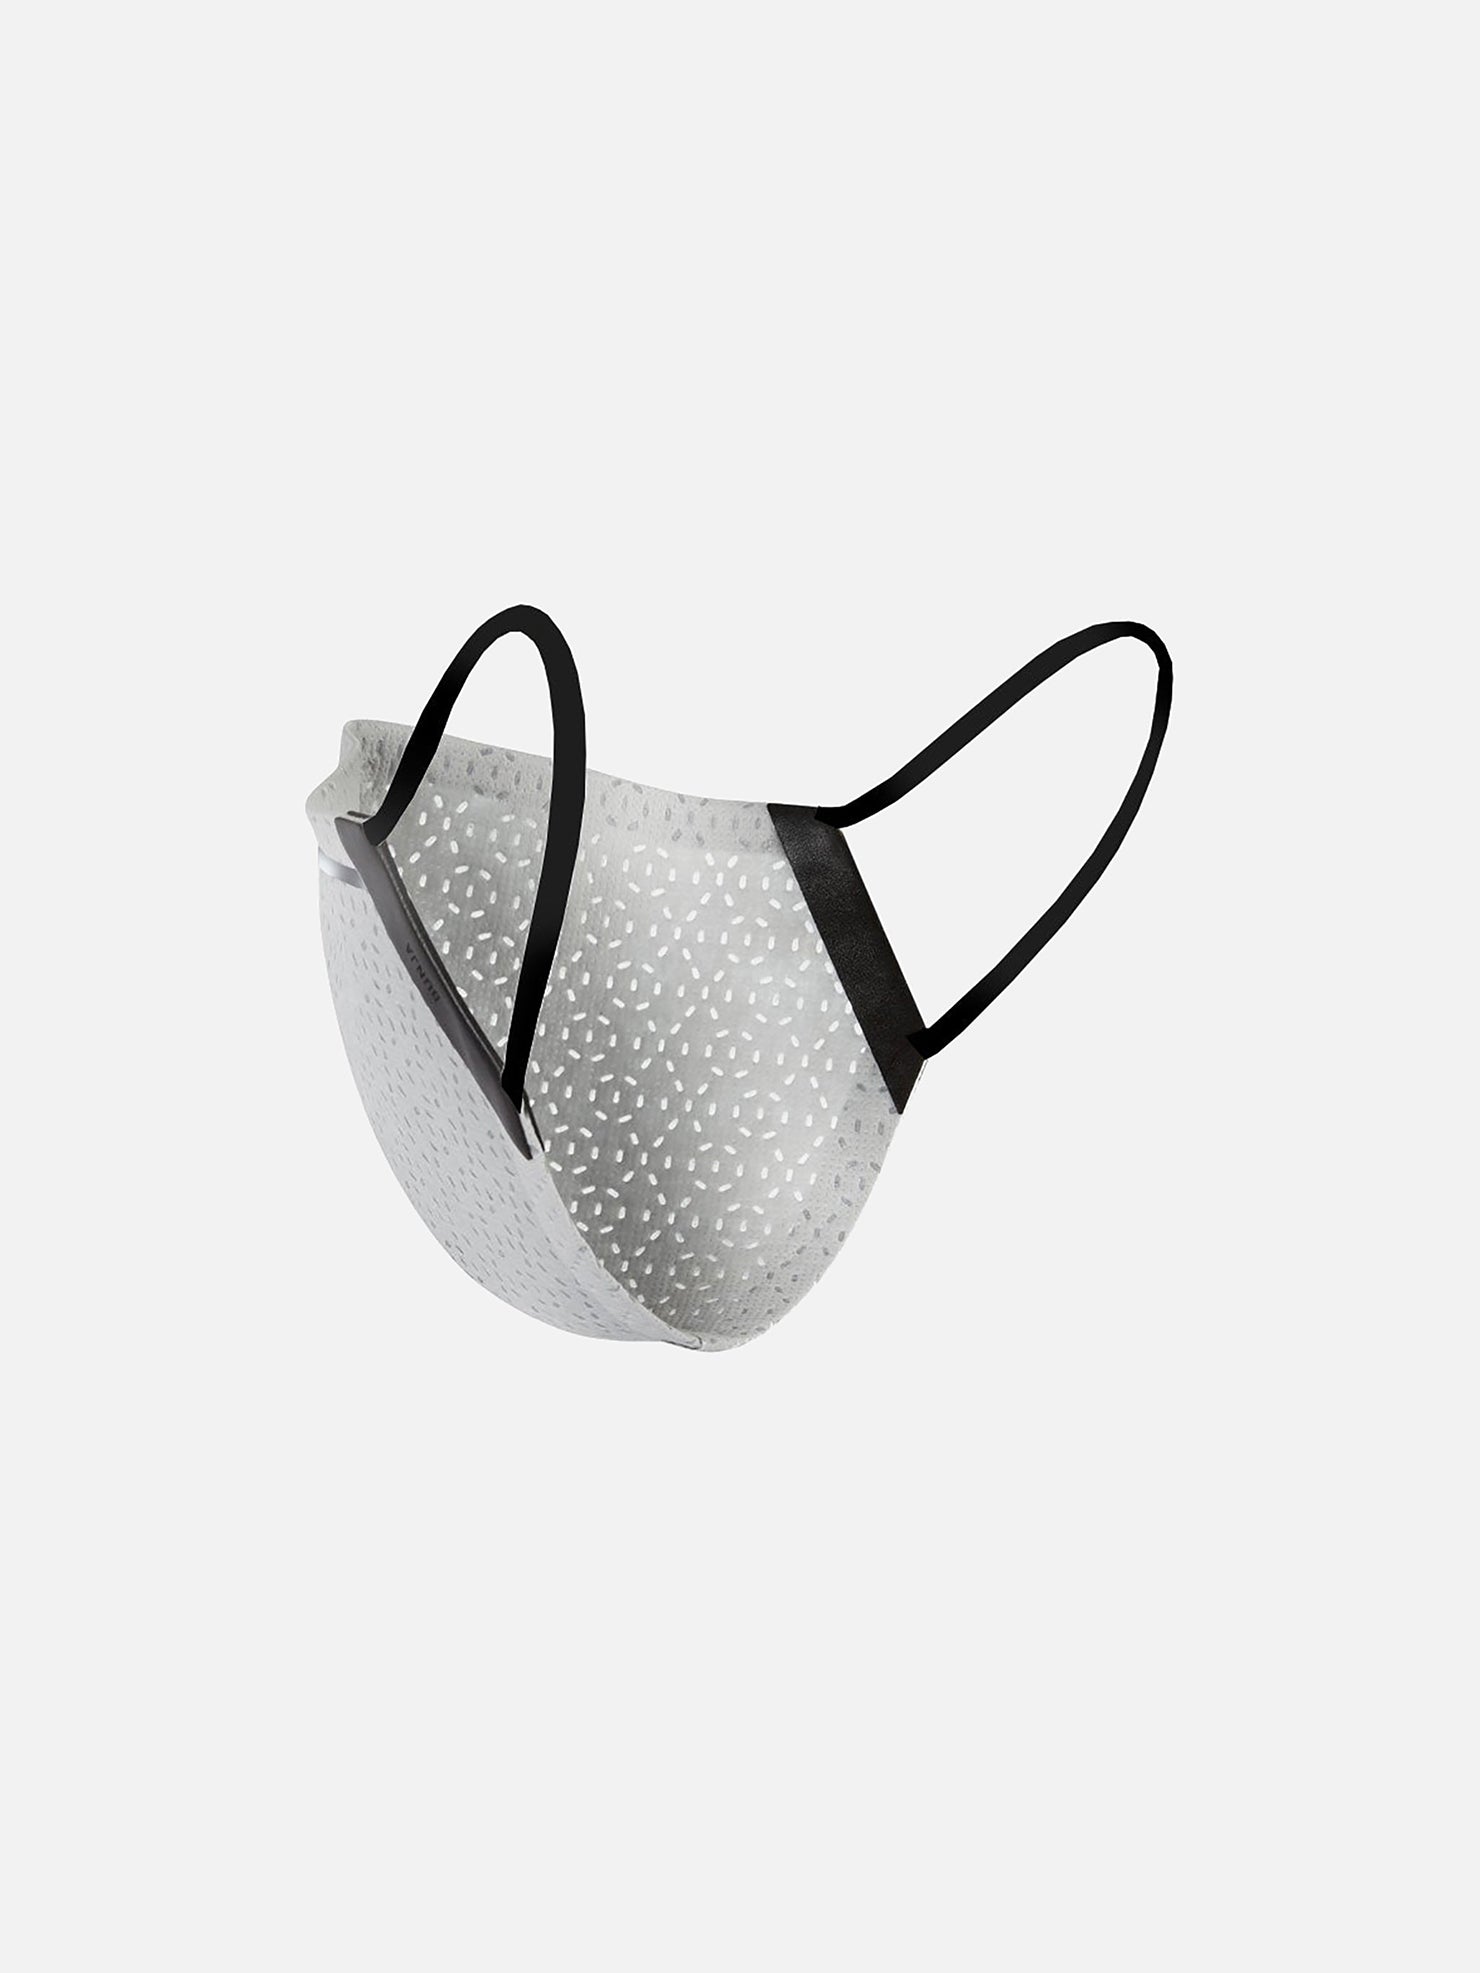 SST SPORT FACE MASK | KILLSPENCER® - Apollo Grey SST and Black Leather and Black